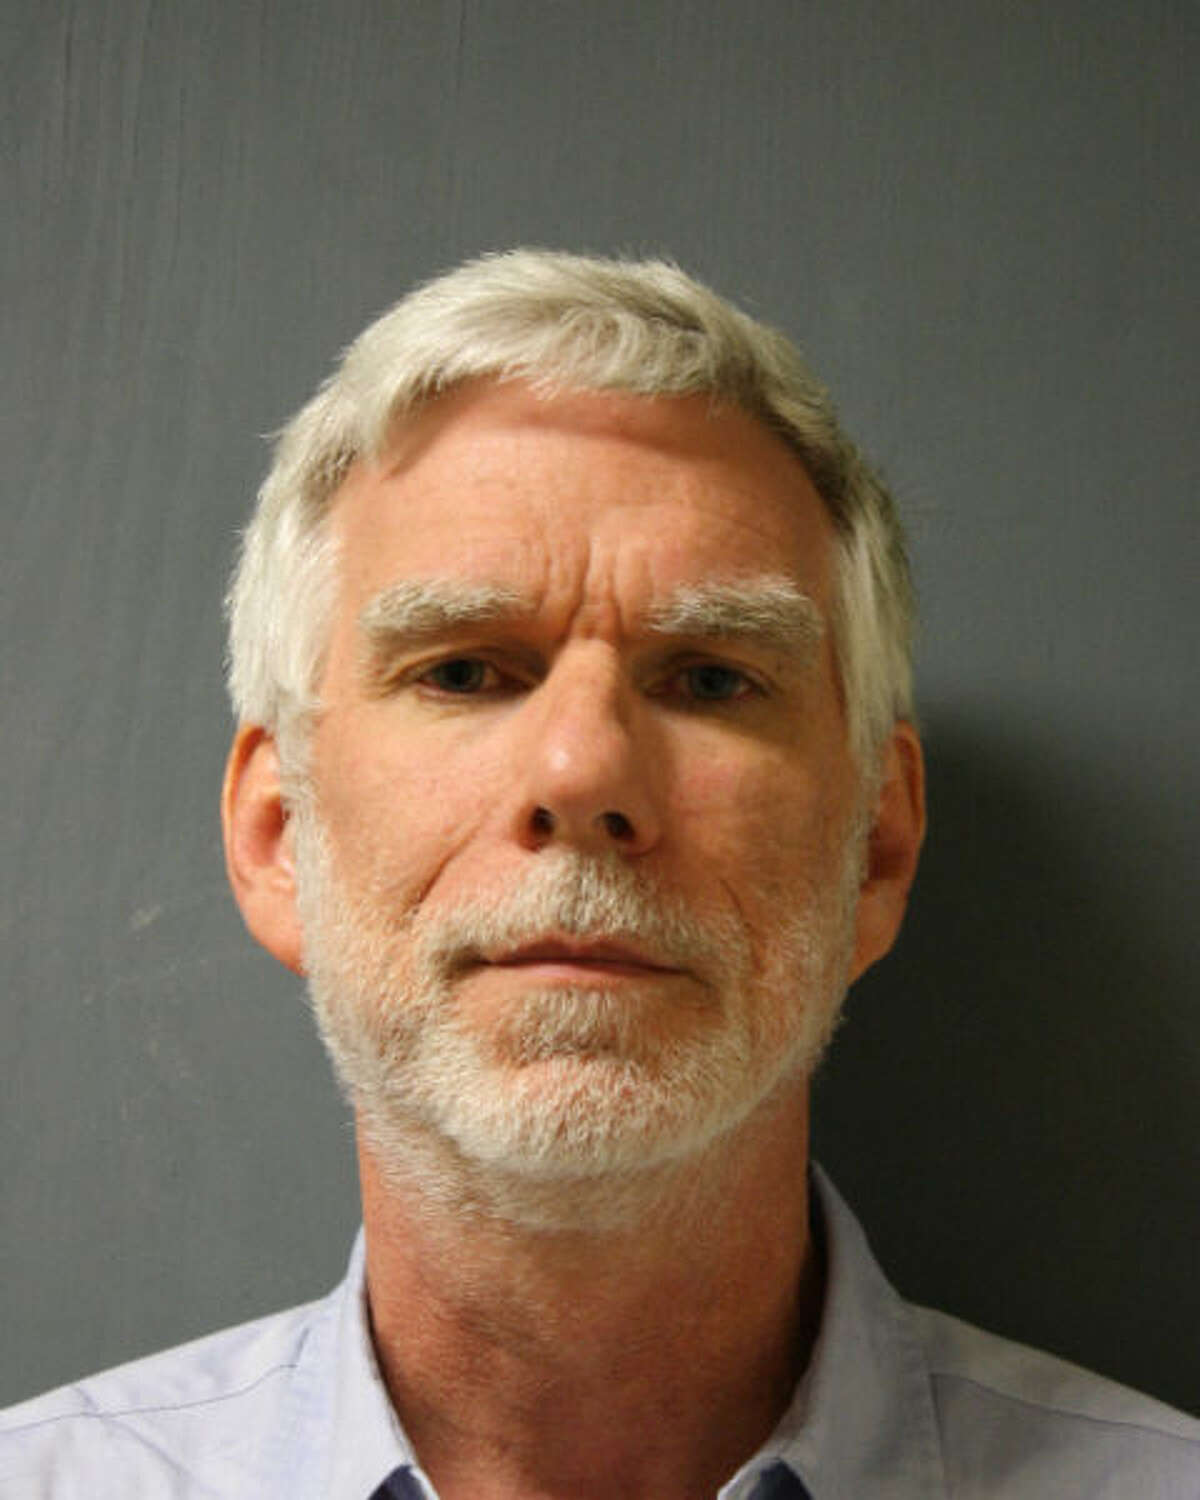 Yetman, 55, was accused of molesting a 7-year-old patient in July 2014 during rounds at Memorial Hermann Hospital.